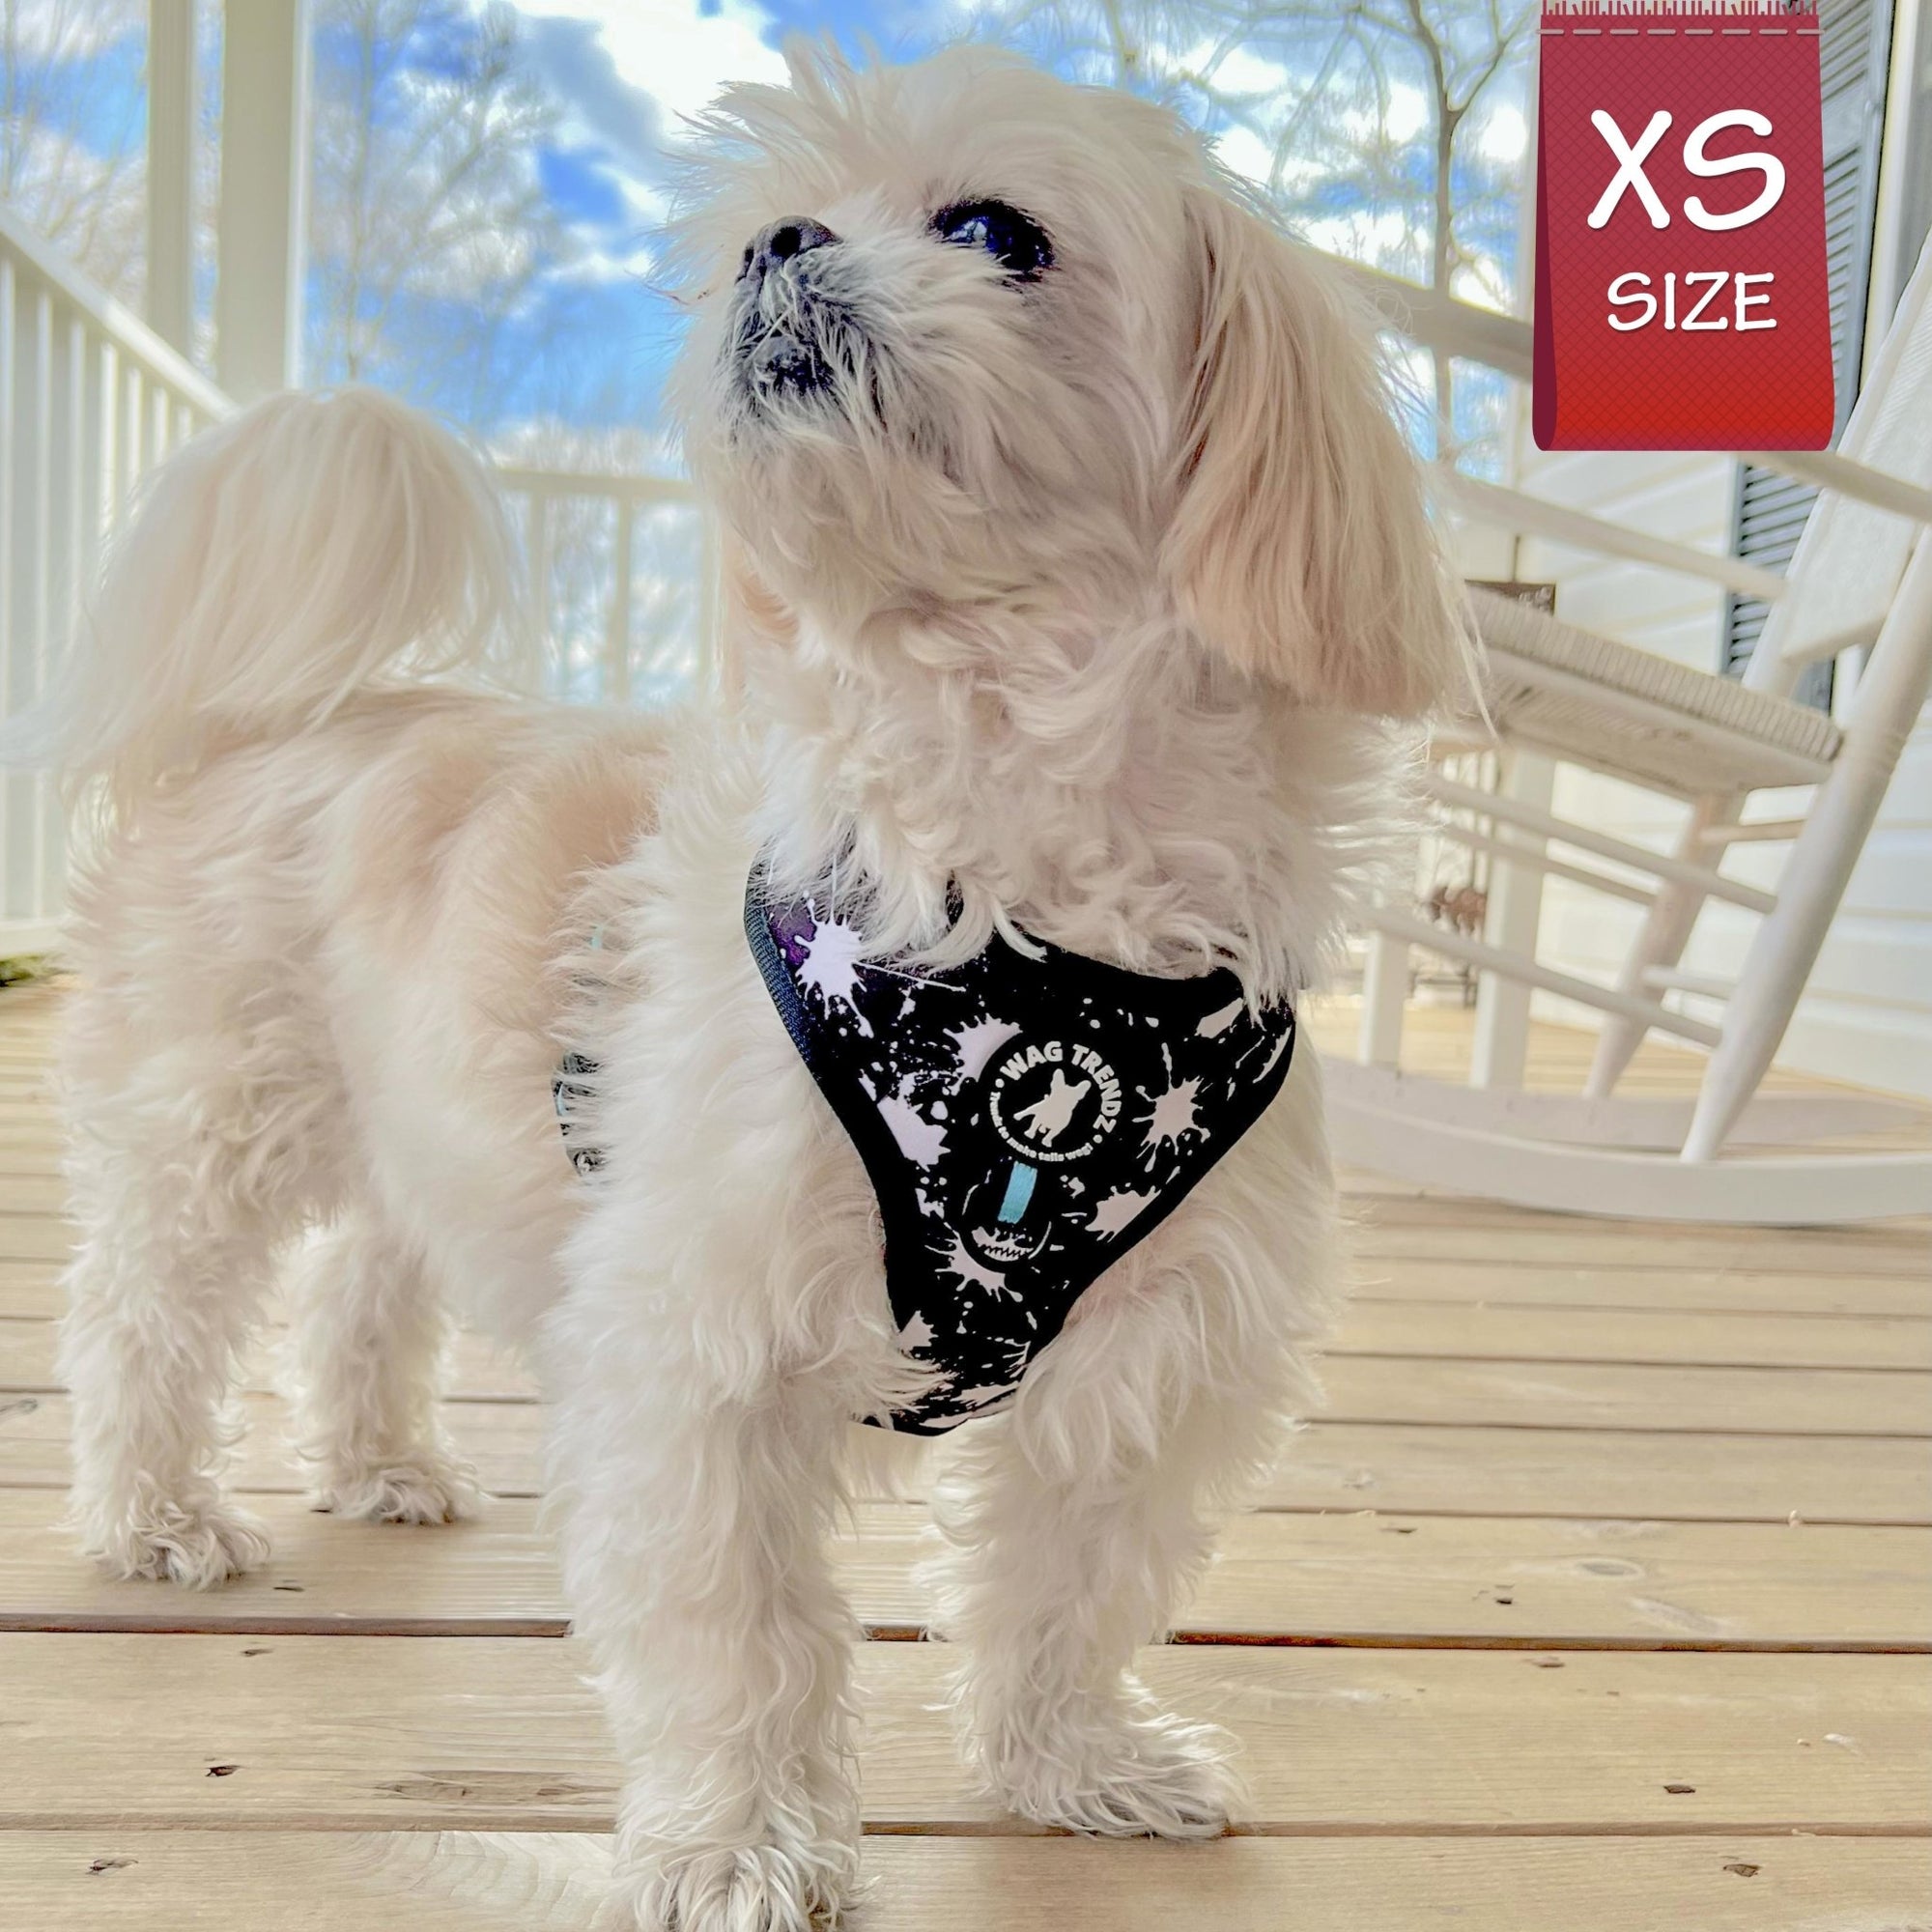 No Pull Dog Harness - Shih Tzu wearing black adjustable harness with white paint splatter and teal accents - front clip for no pull training - standing outdoors on a wood deck - Wag Trendz